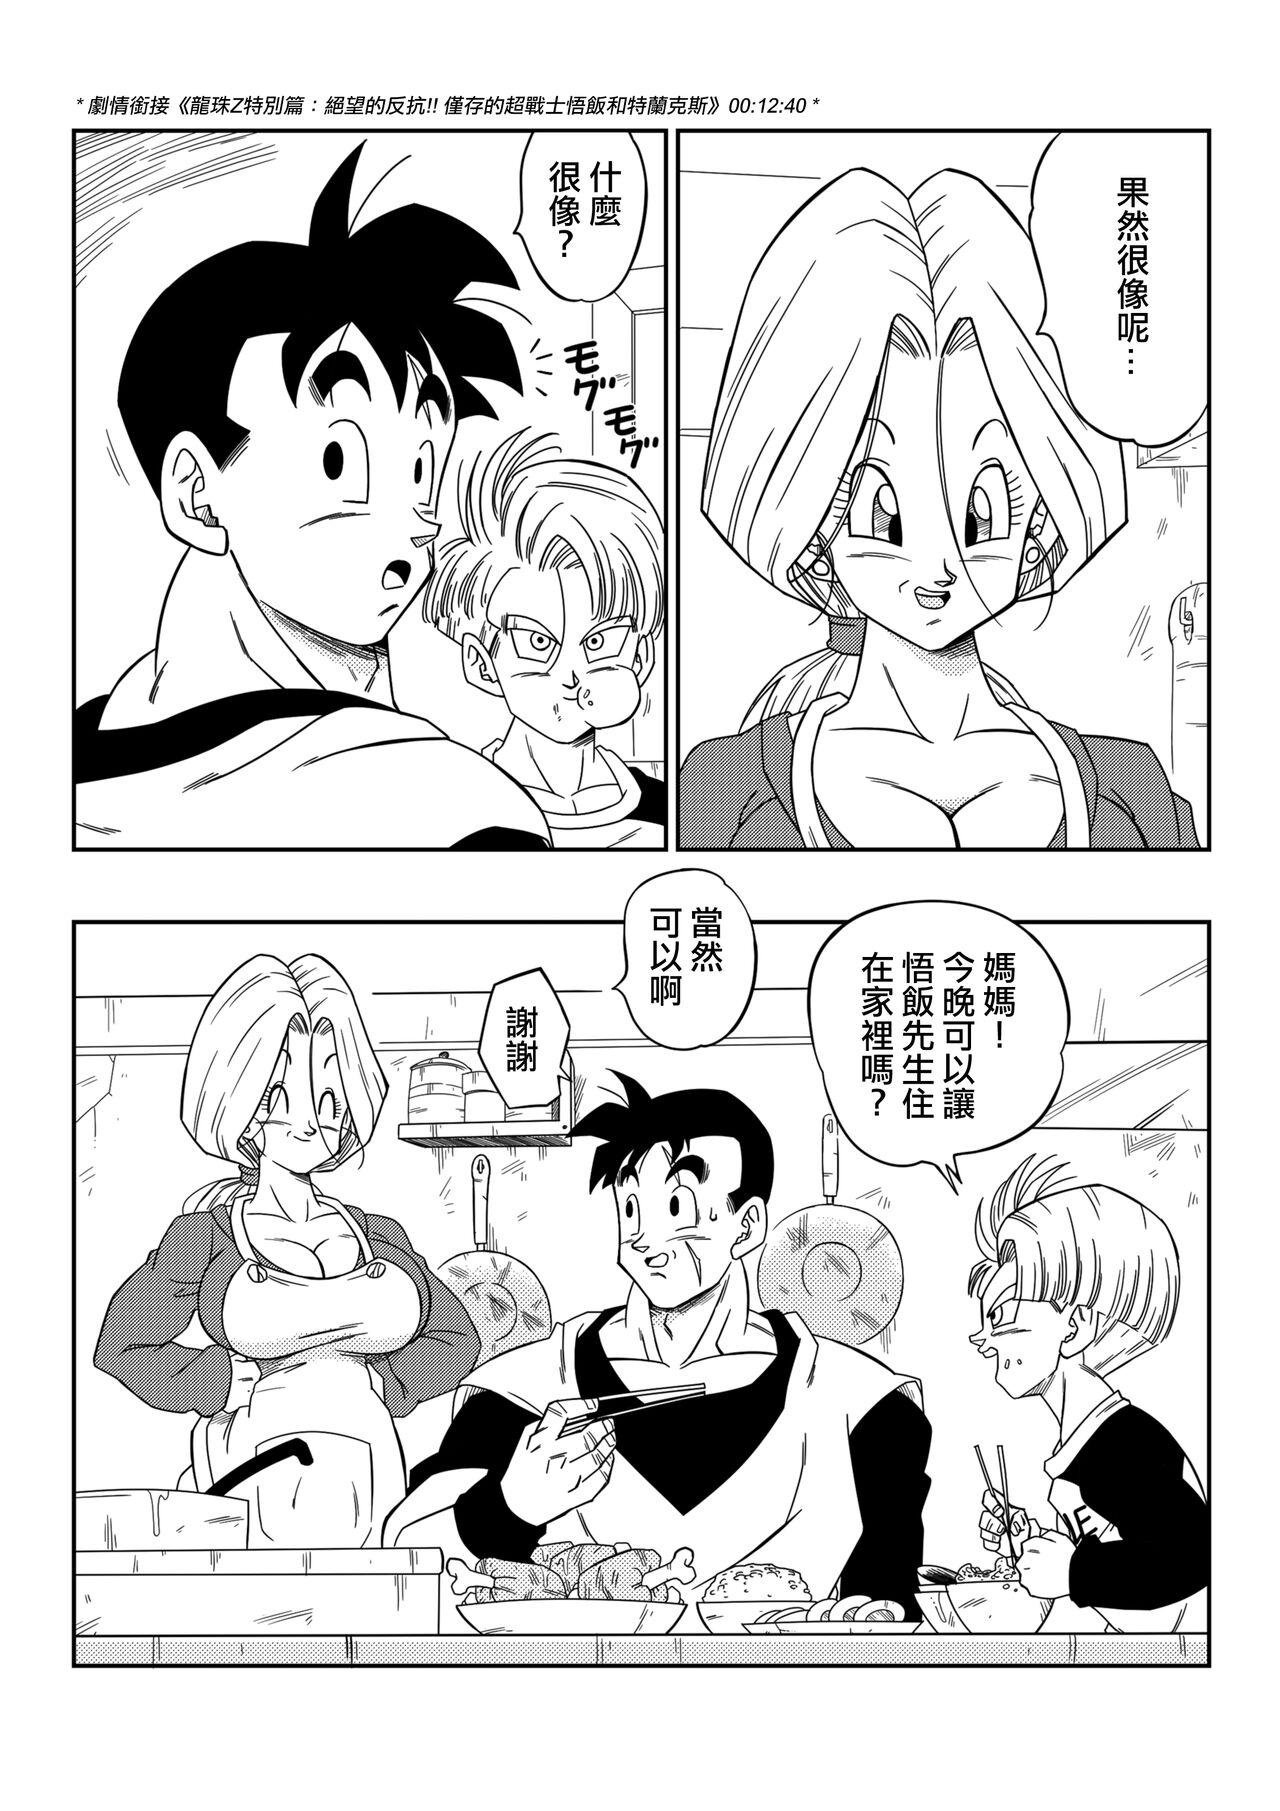 Lost of sex in this Future! - BULMA and GOHAN 3